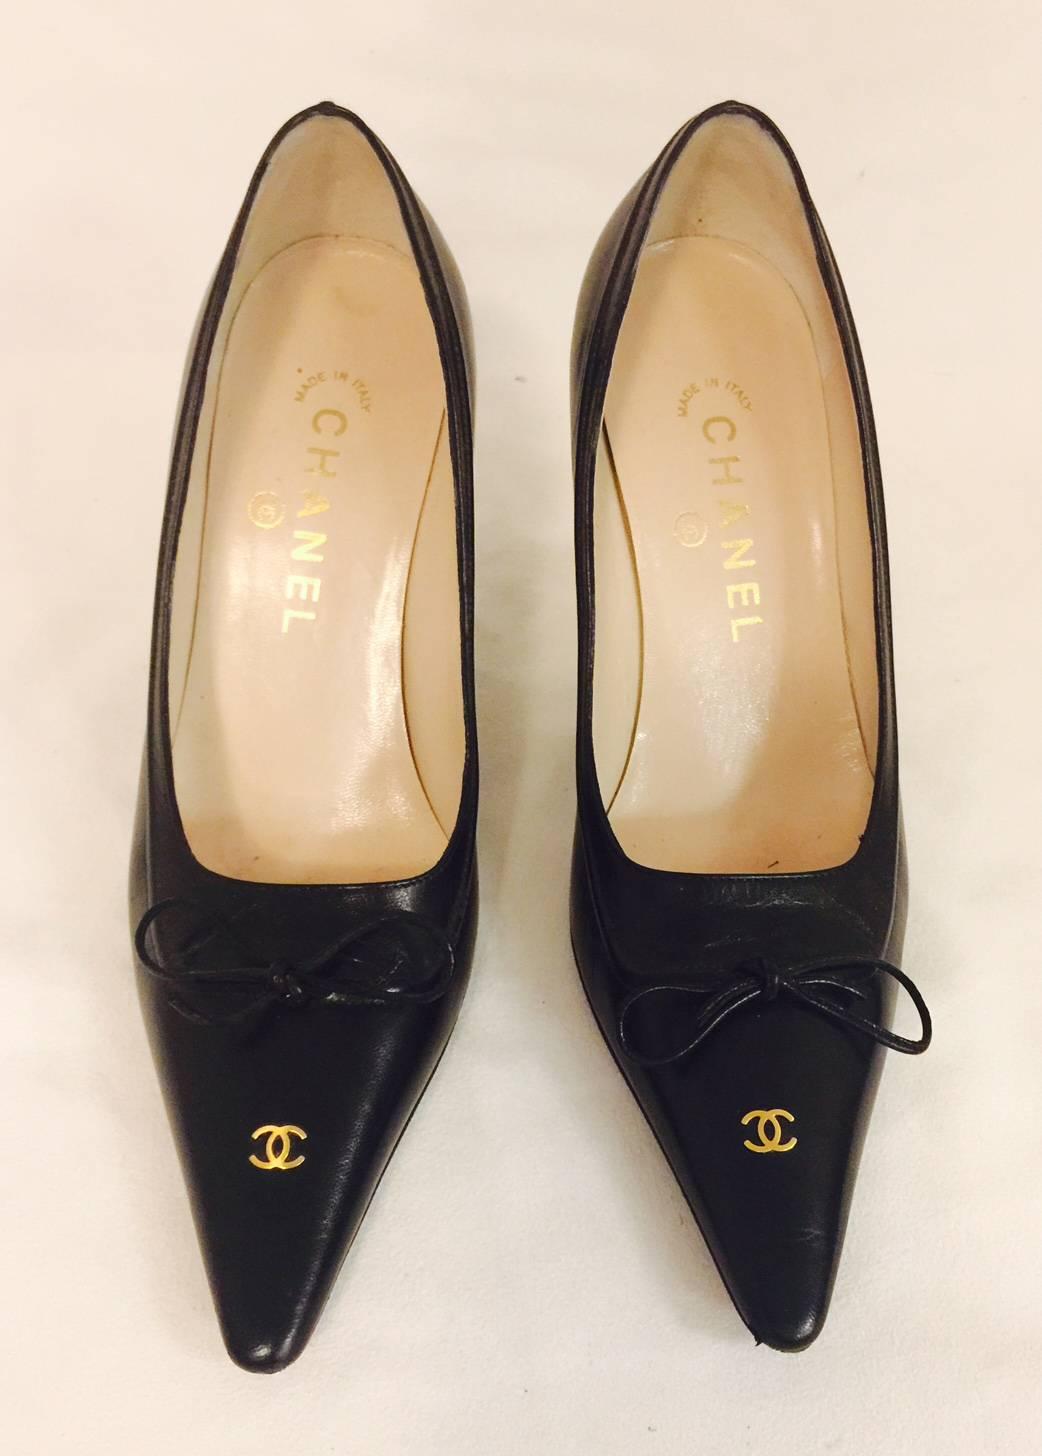 Chanel pumps are a must for any woman of substance!  Features classic silhouette, pointed toes and 3.25